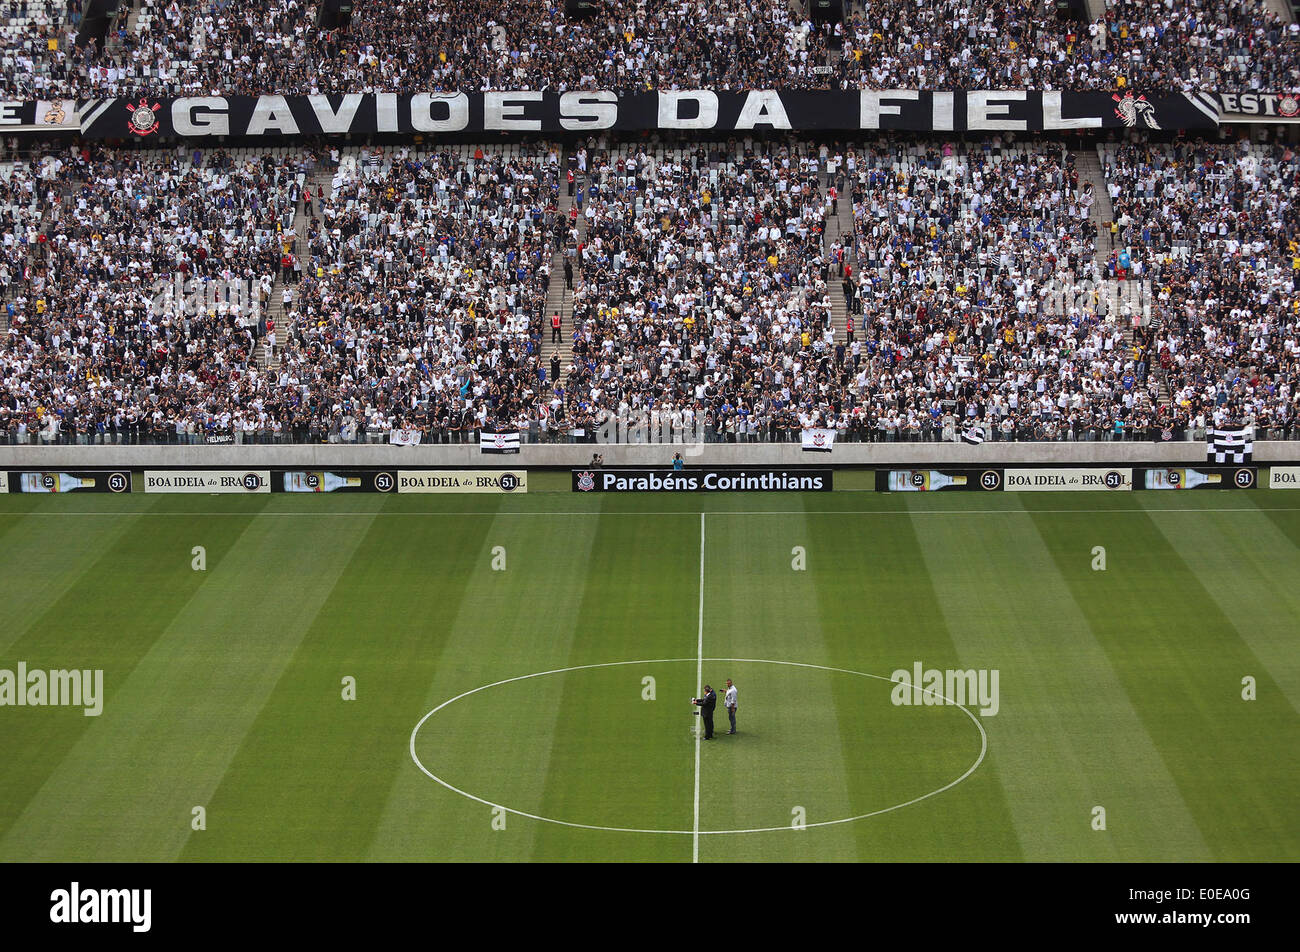 Sao Paulo, Brazil. 10th May, 2014. People attend a test event for the opening game of FIFA World Cup Brazil 2014, at Arena de Sao Paulo stadium, in Sao Paulo, Brazil, on May 10, 2014. Credit:  Rahel Patrasso/Xinhua/Alamy Live News Stock Photo